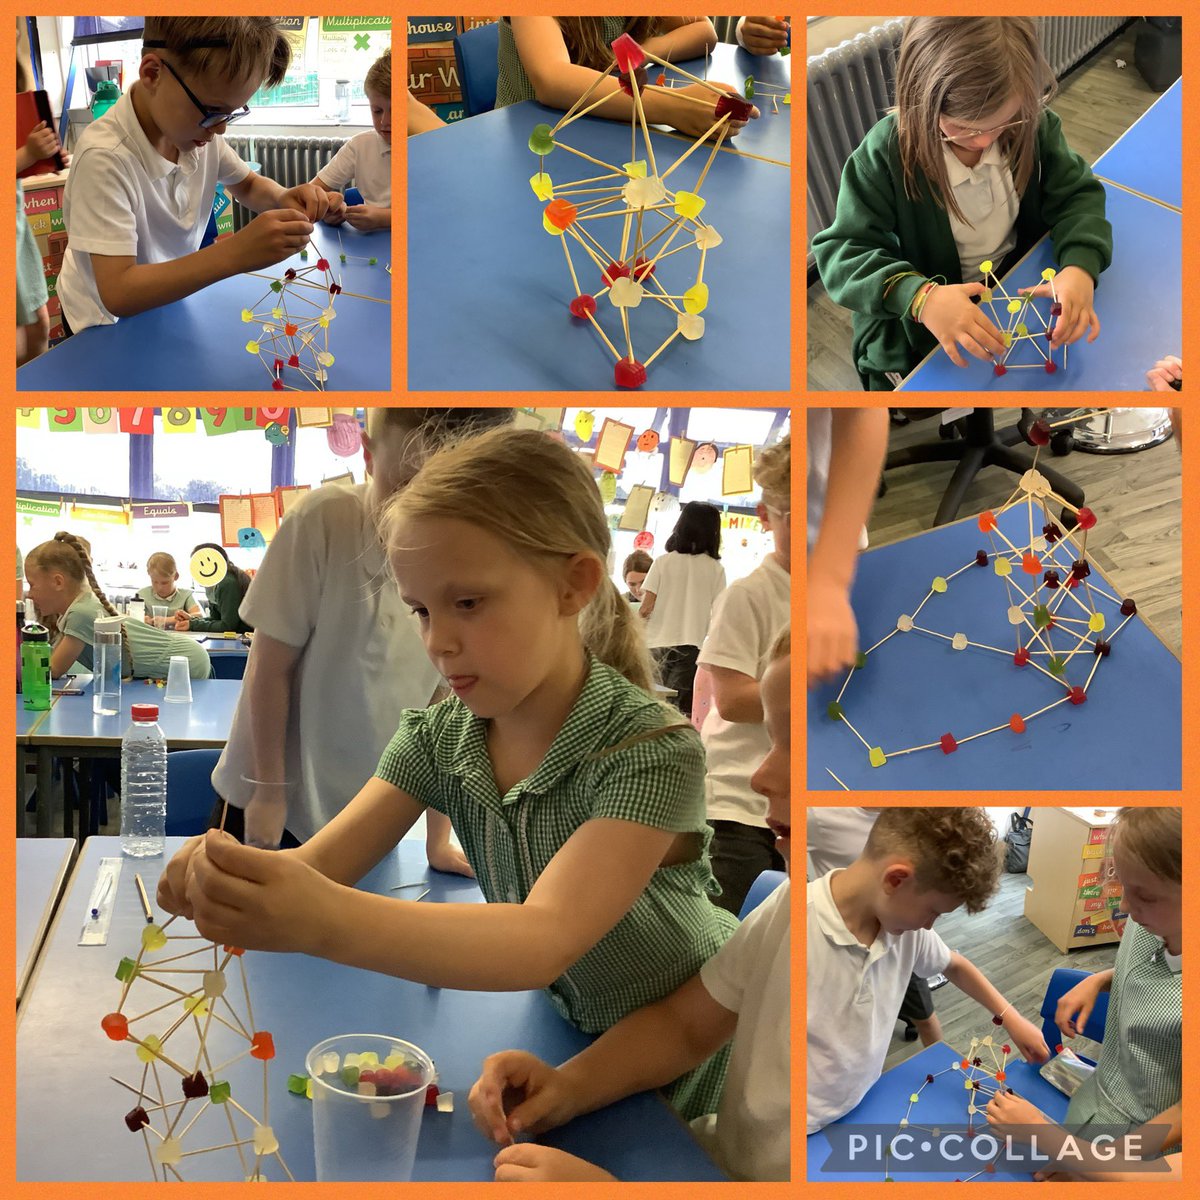 In Design Technology we have been looking at Pavillions and how we can build our own stable structures. Using toothpicks and sweets, we fashioned (relatively) steady structures and reinforced them so they wouldn’t collapse! #sjsbDT #SJSBSTEM #STEM @kapowprimary